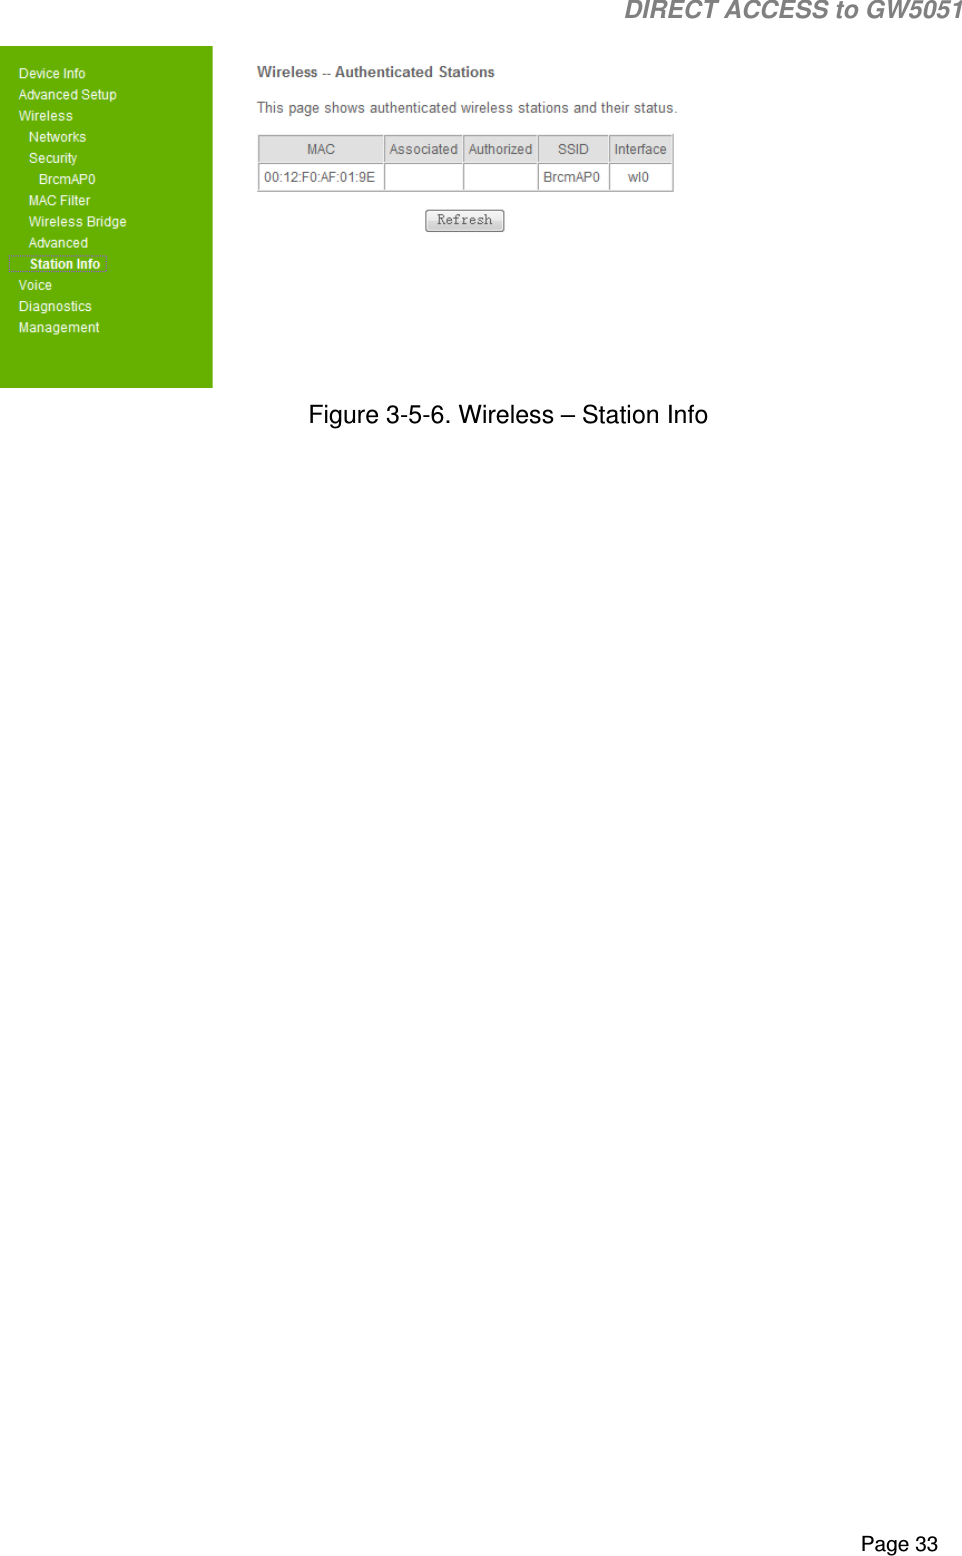                                                                                                                                                                                                                           DIRECT ACCESS to GW5051    Page 33  Figure 3-5-6. Wireless – Station Info